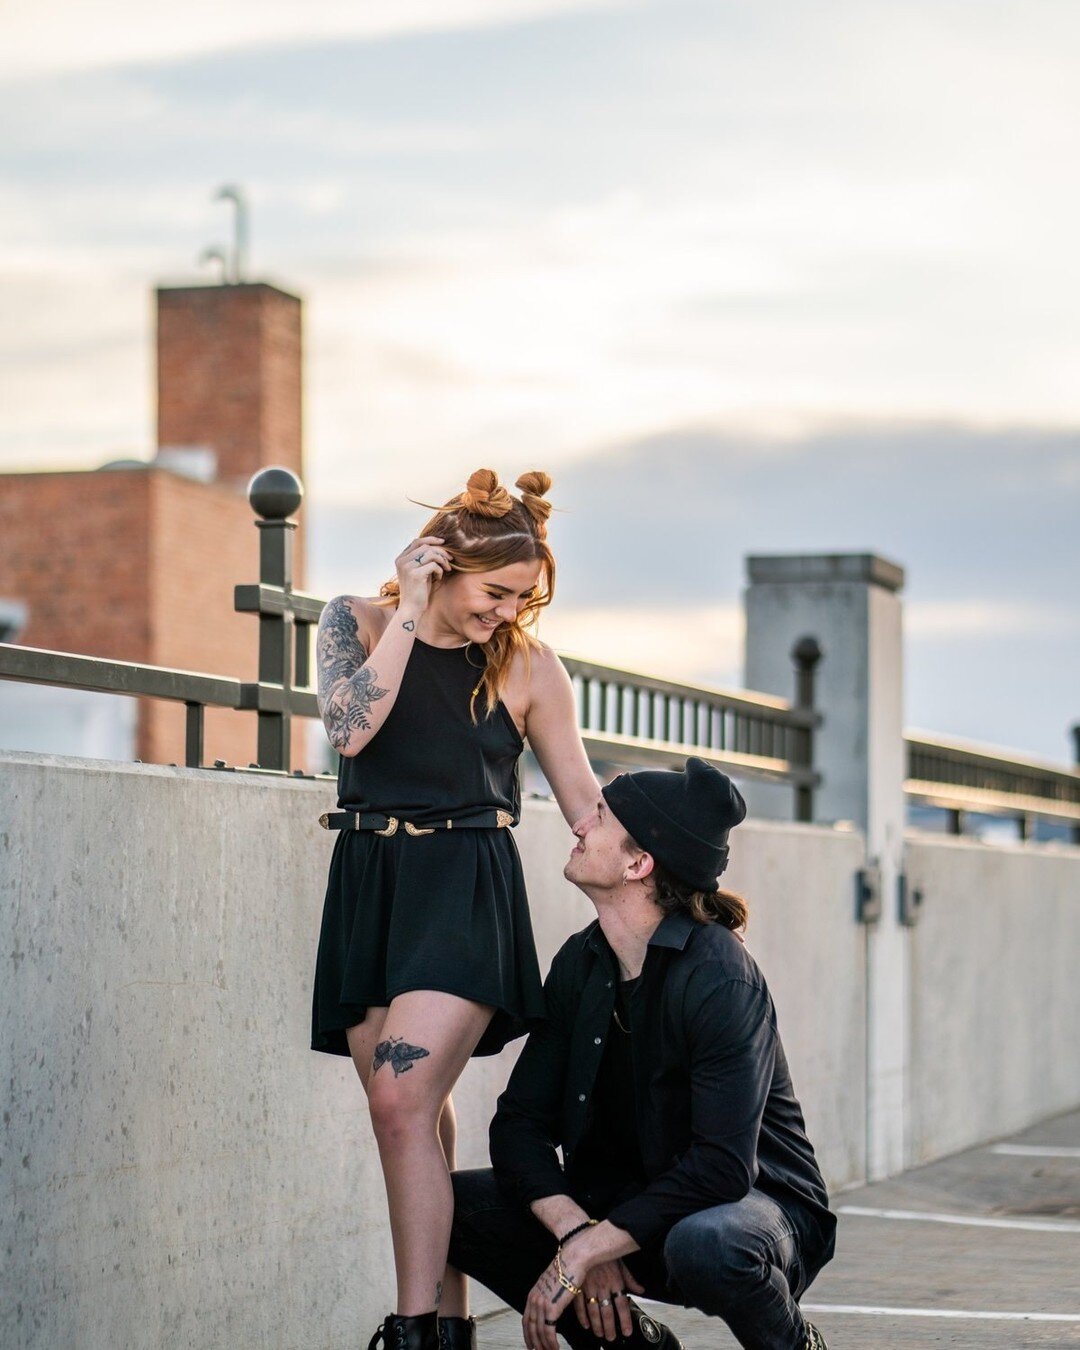 I visited my friend @haleyleddon in Rapid this Summer. Haley is a model in the black hills area. We did a couple of fun photo shoots - including this one with her boyfriend @rockhayford. Haley and Rock rocked this photo session in all black attire.
I